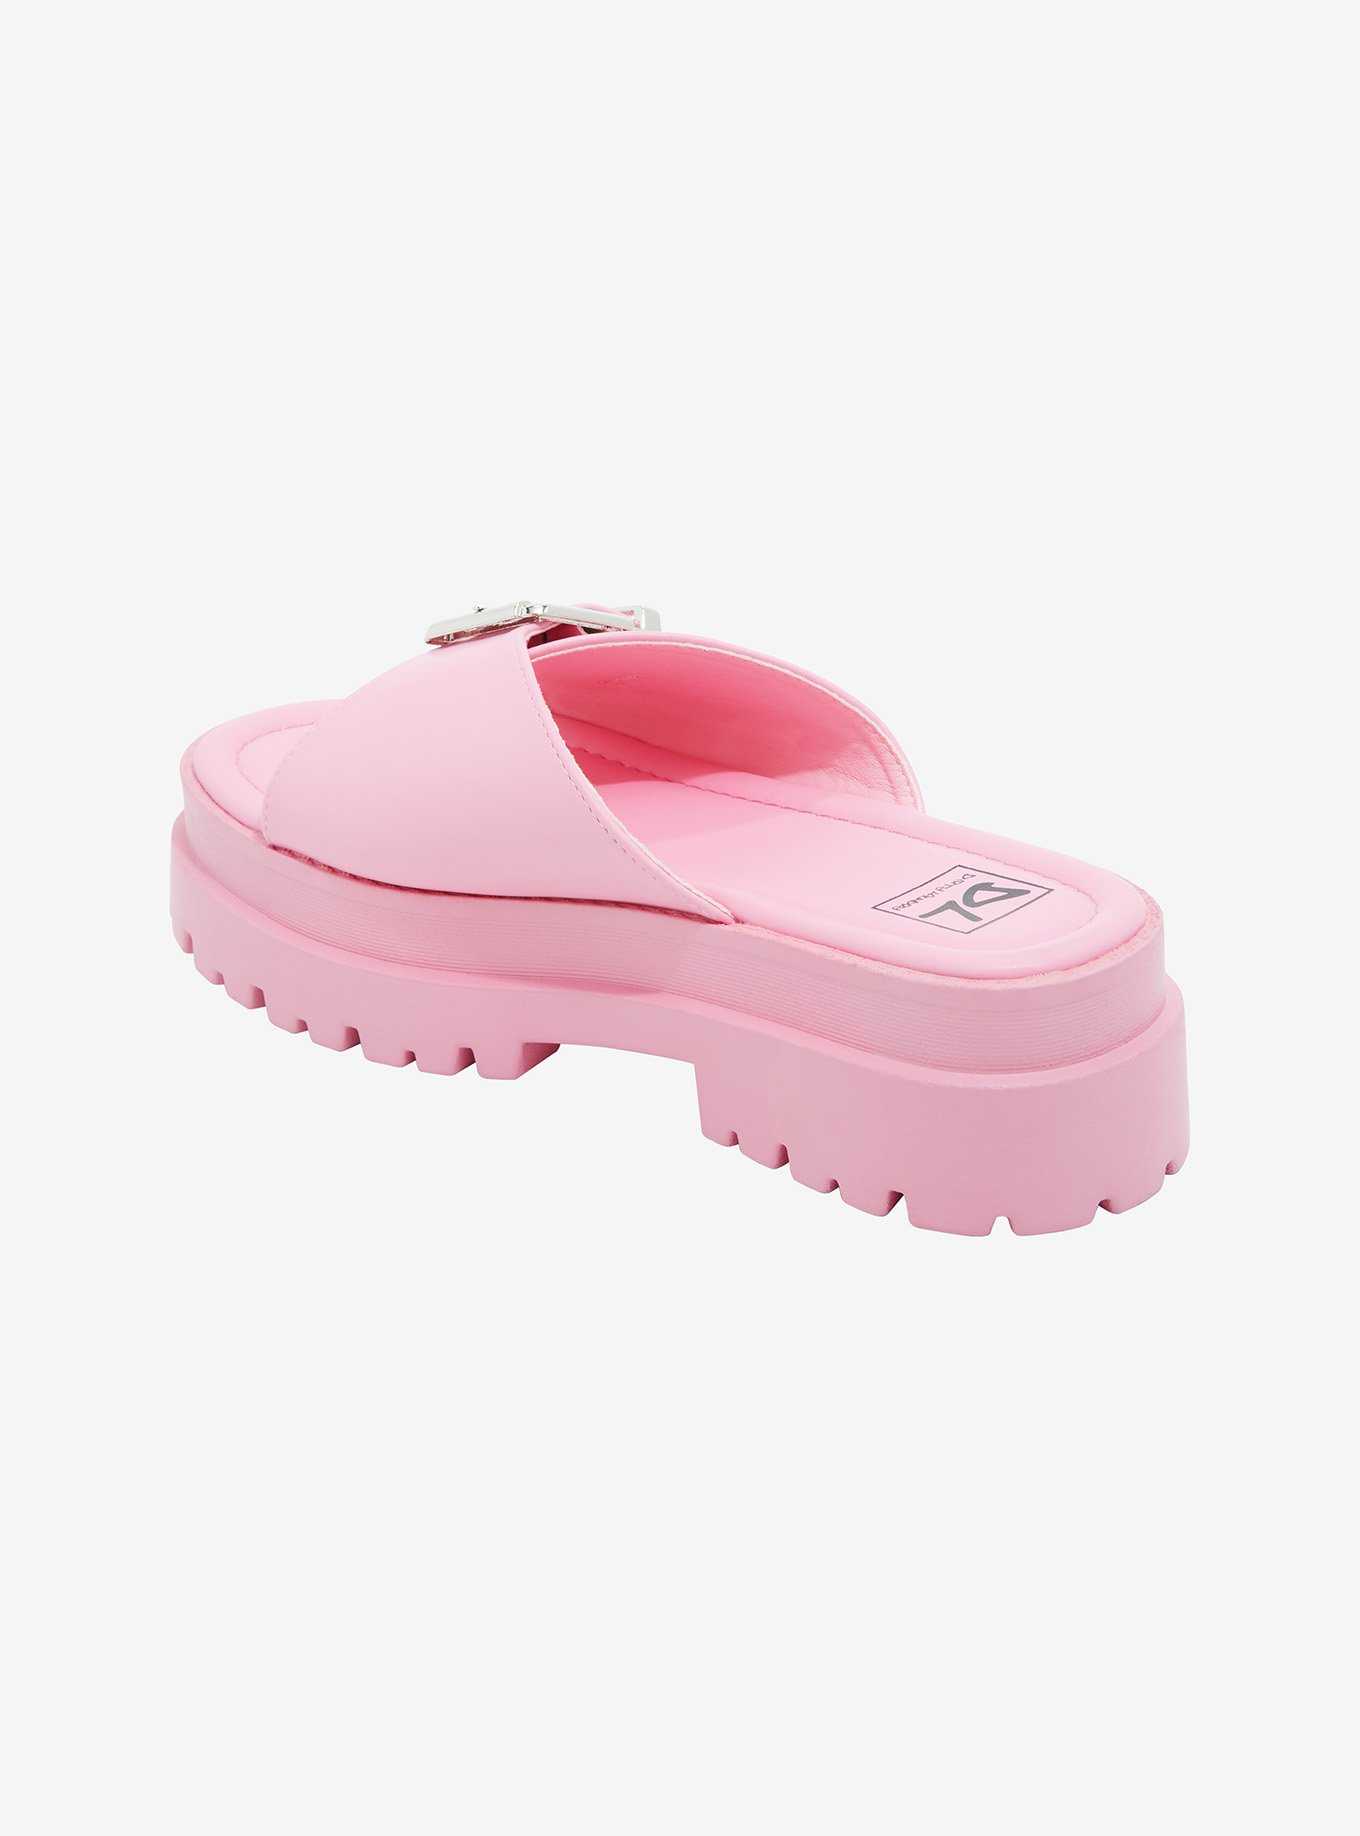 Dirty Laundry Pink Buckle Sandals, , hi-res